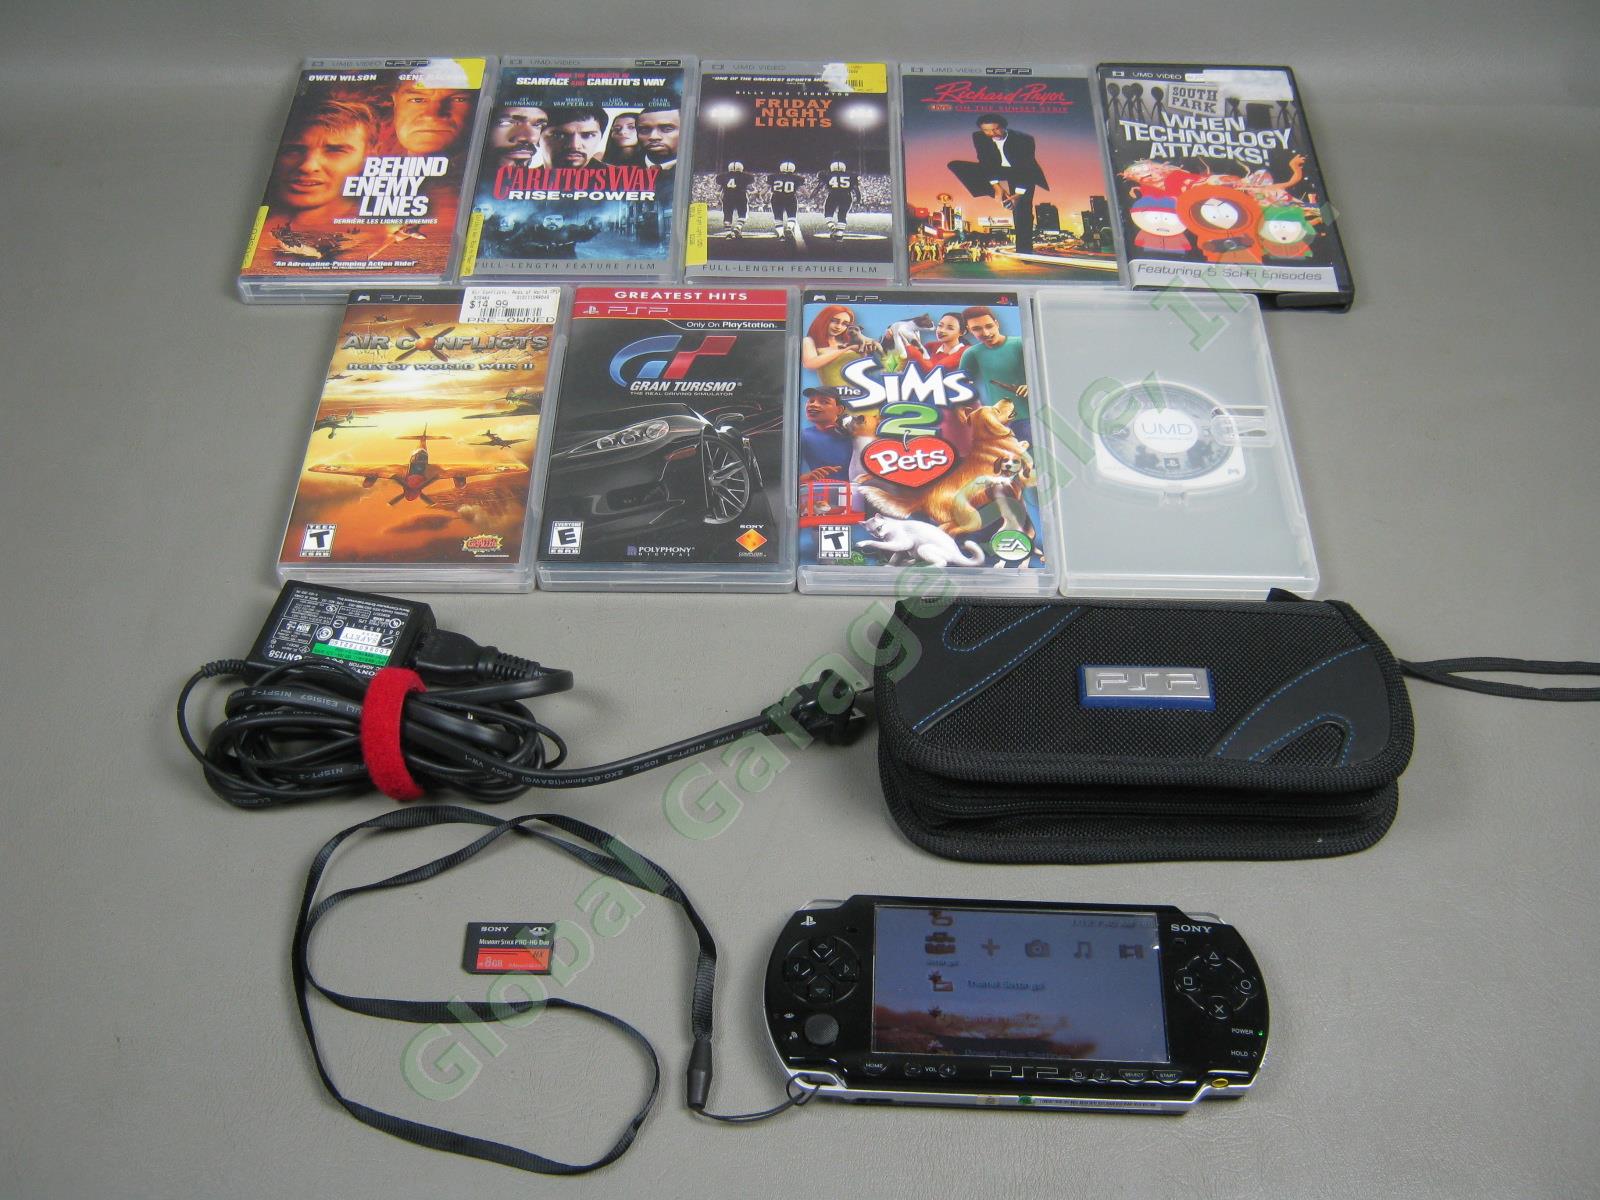 Sony PSP-2001 + Charger Battery 4 Games 5 UMD Movies 8GB Memory Card Bundle Lot